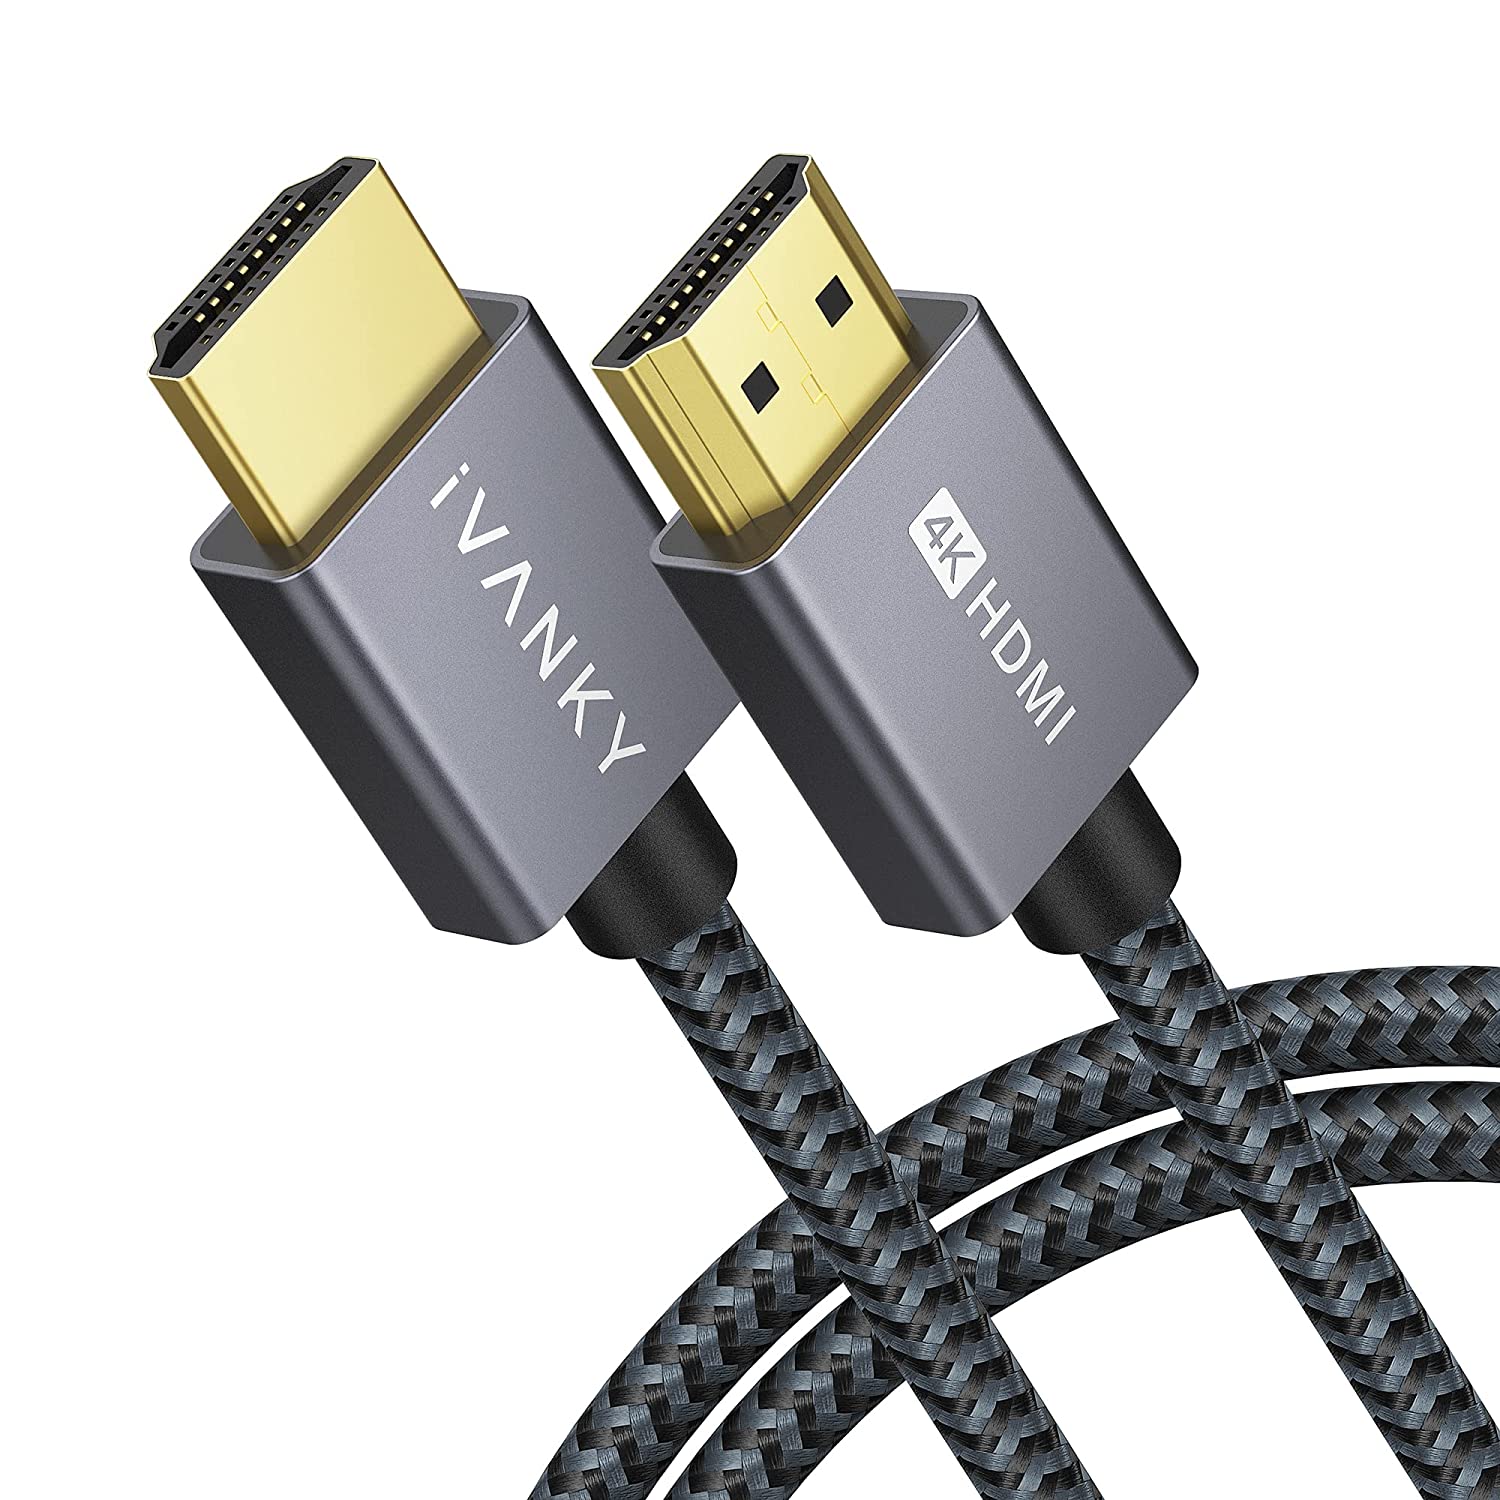 iVANKY 4K Realistic 3D HDMI 2.0 Cable Cord, 6.6-Foot